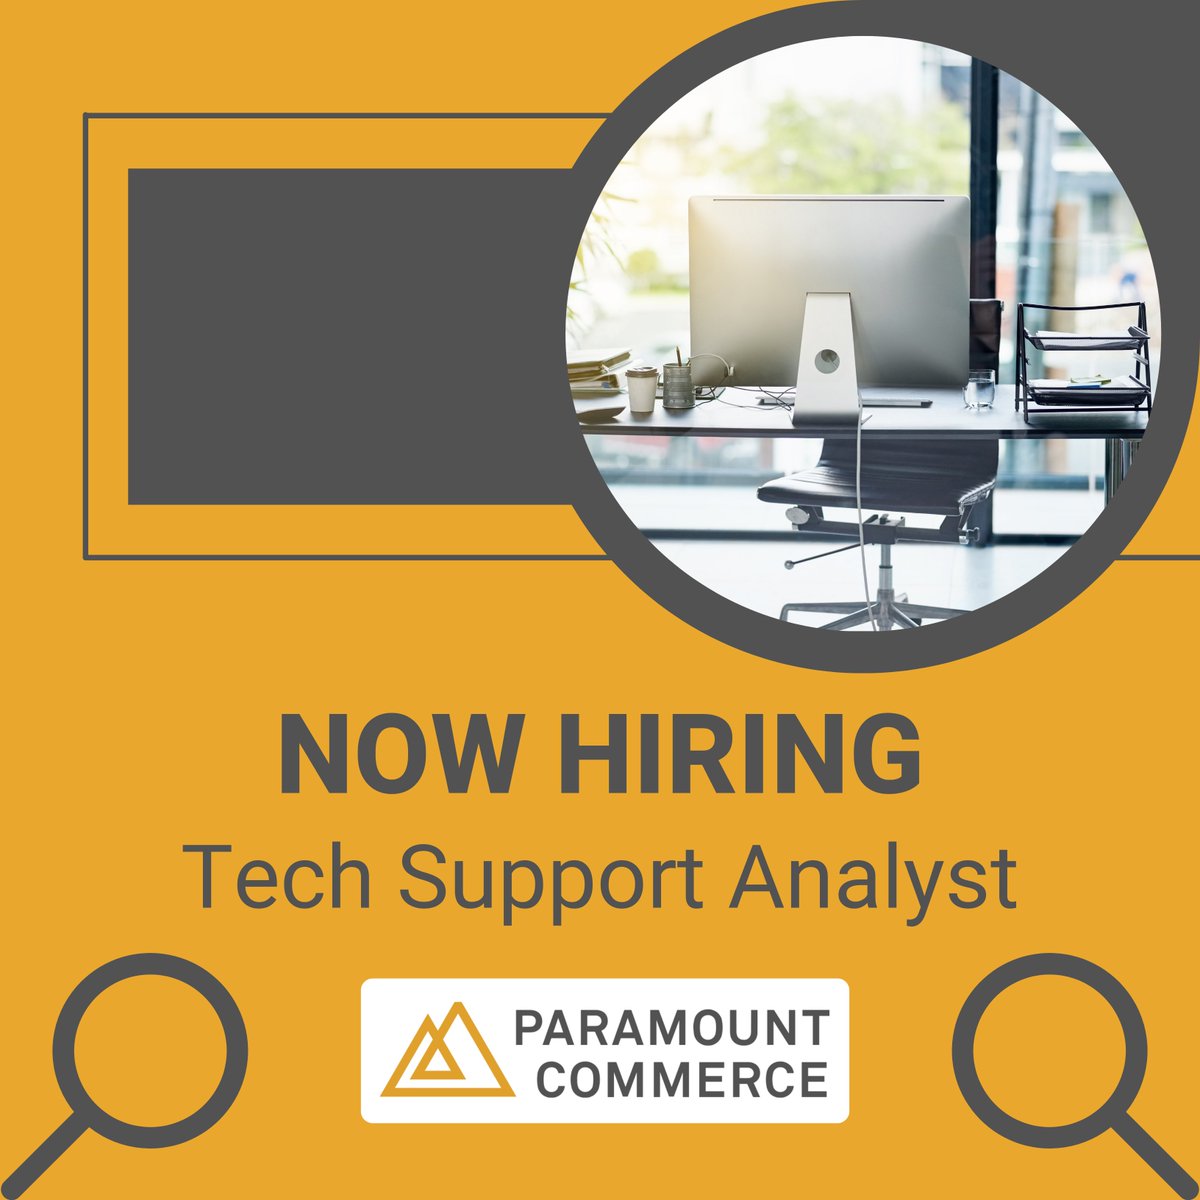 Paramount Commerce is #Hiring! Tech Support Analyst in Canada ow.ly/TUHH50Jg9YR

courtesy ow.ly/2cXj50Jg9YC
#techsupport #techsupportjobs #techjobs #itjobs #remotejobs #remotecanada #canadajobs #hiring #nowhiring #job #jobs #jobopportunity #careers #careeropportunity